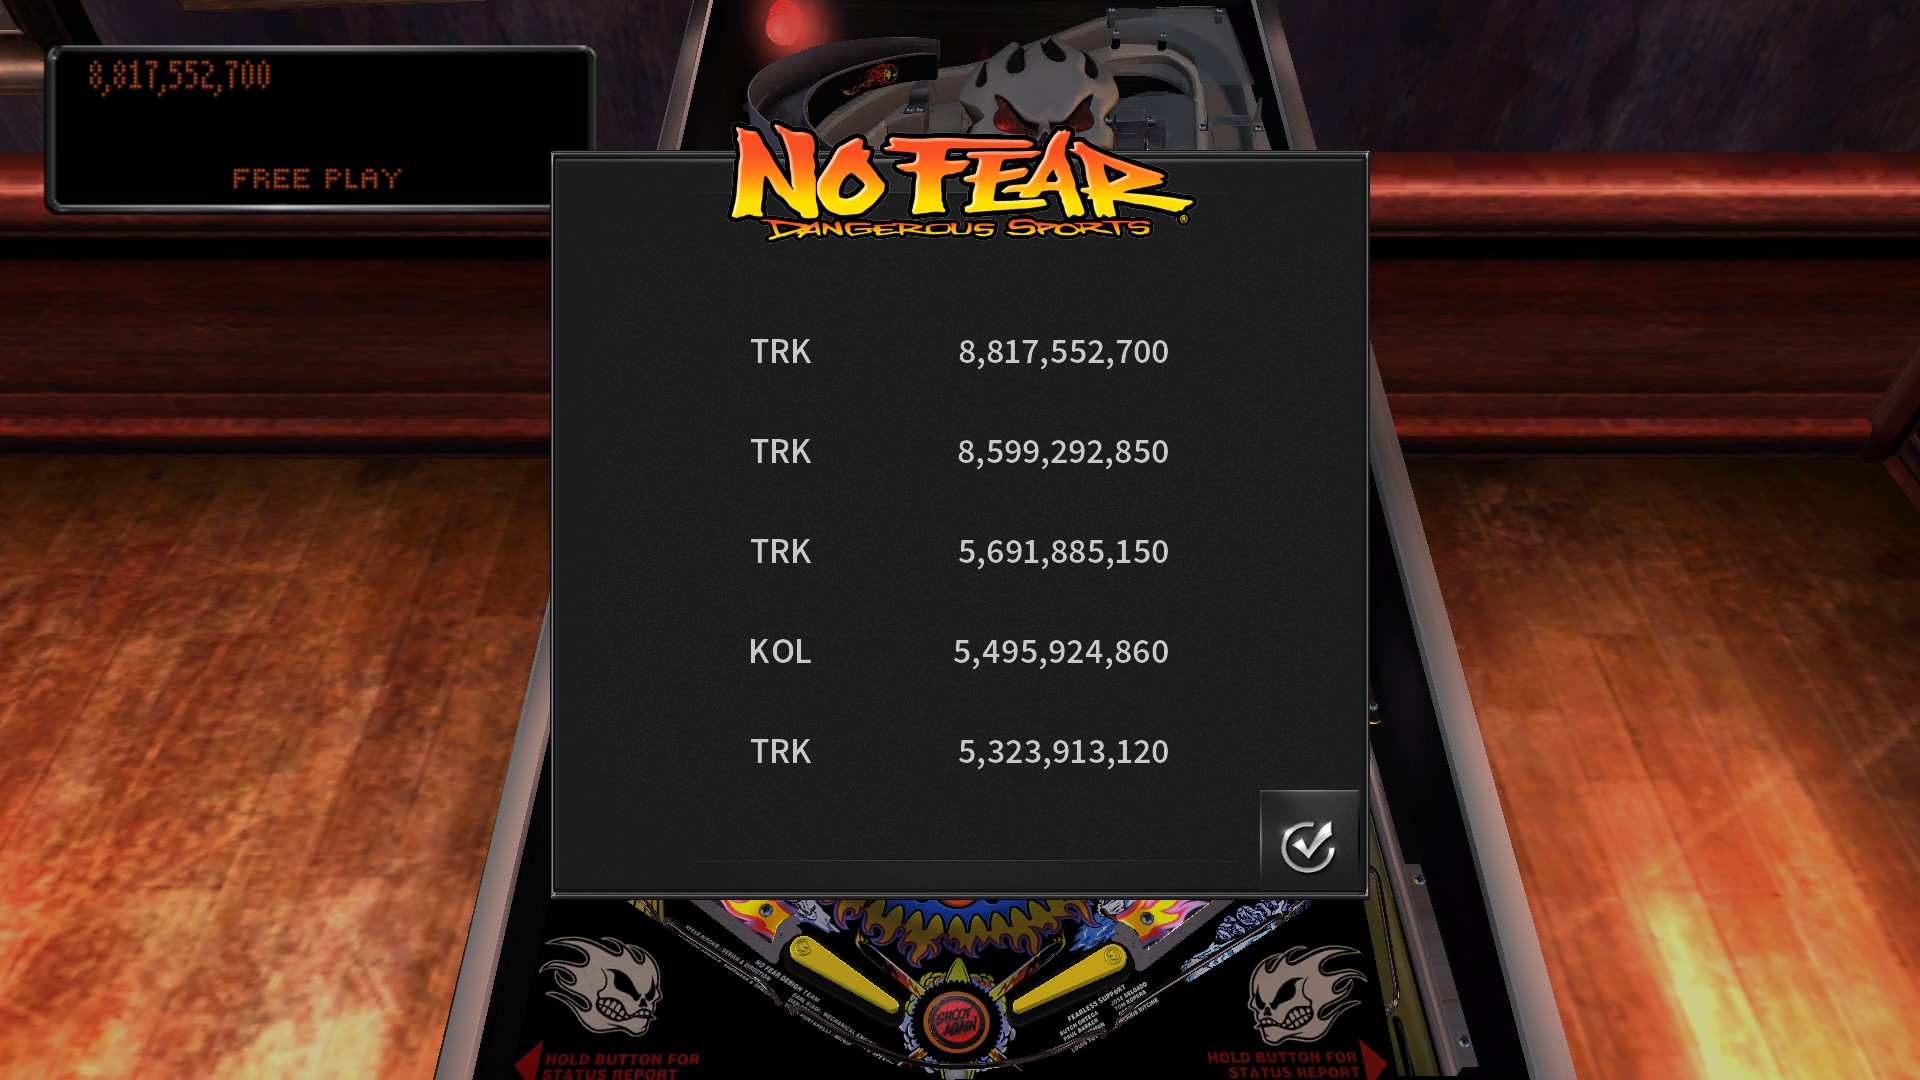 TheTrickster: Pinball Arcade: No Fear: Dangerous Sports (PC) 8,817,552,700 points on 2016-09-01 05:00:07